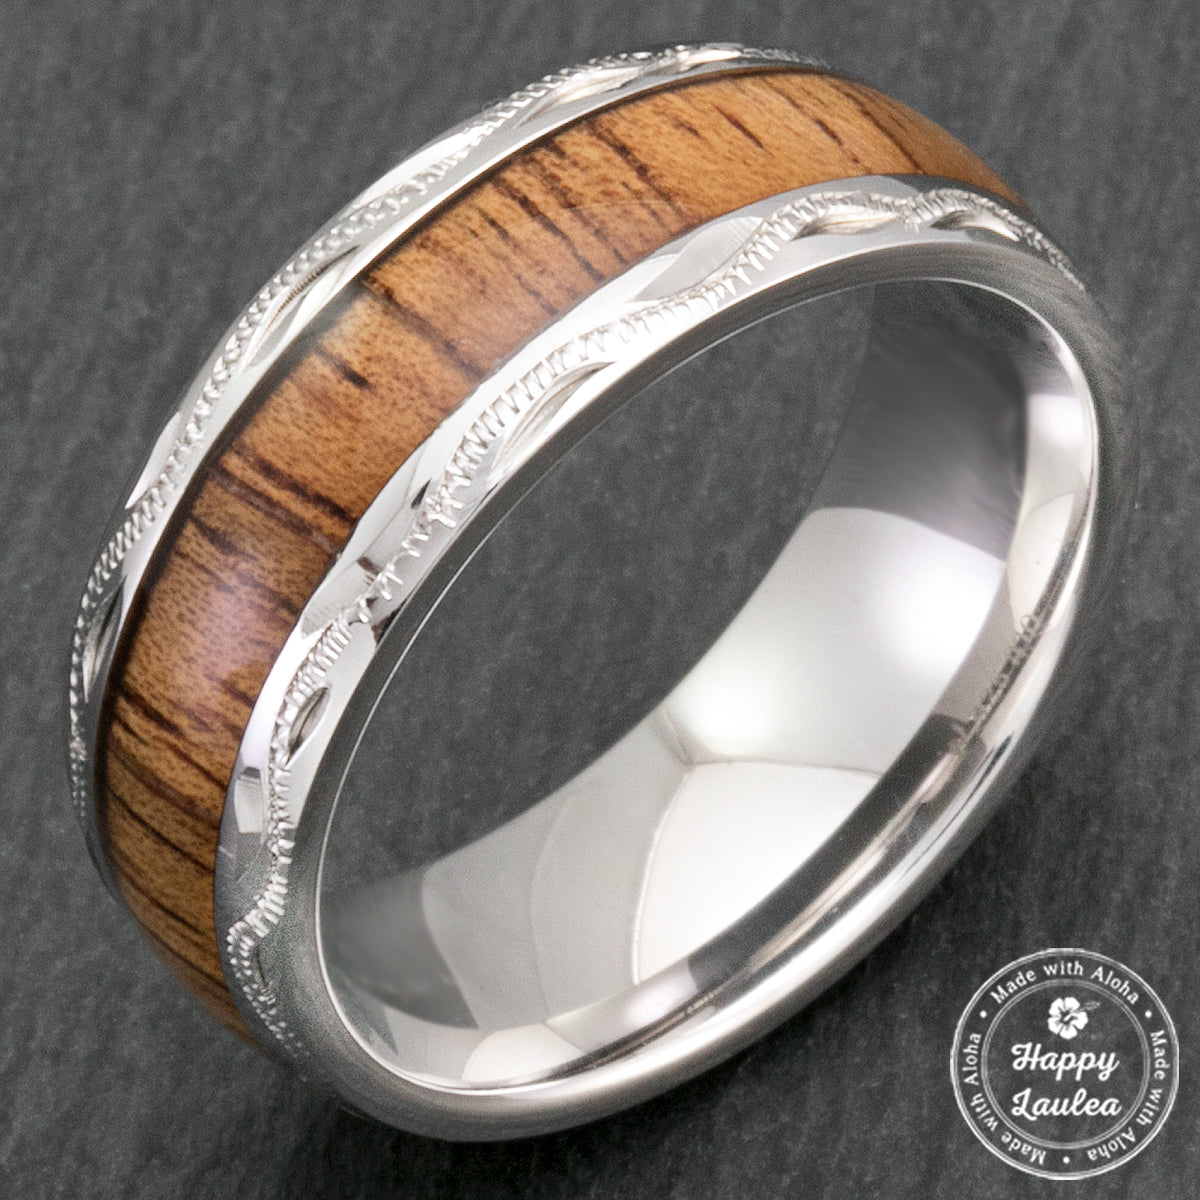 Sterling Silver Hand Engraved Hawaiian Jewelry Ring with Koa Wood Inlay - 8mm, Dome Shape, Comfort Fitment